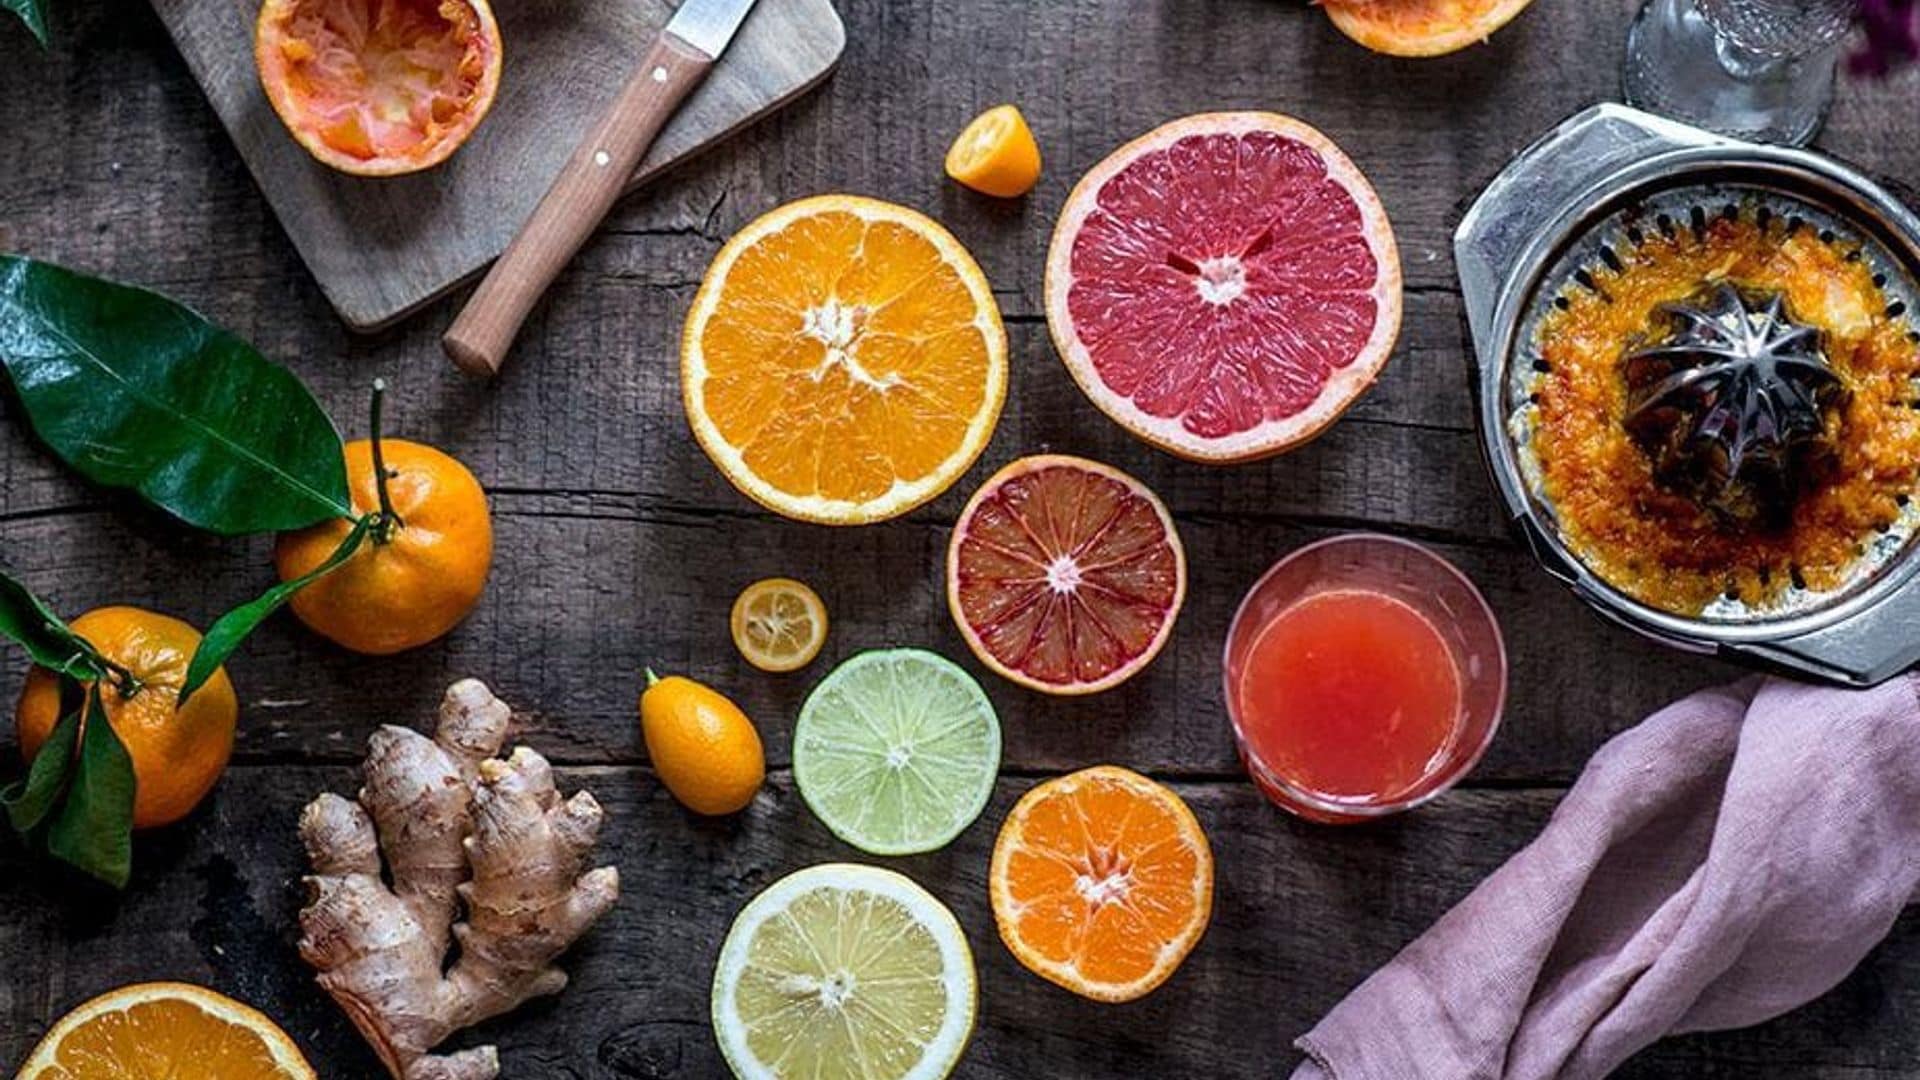 These 14 foods can help boost your immune system